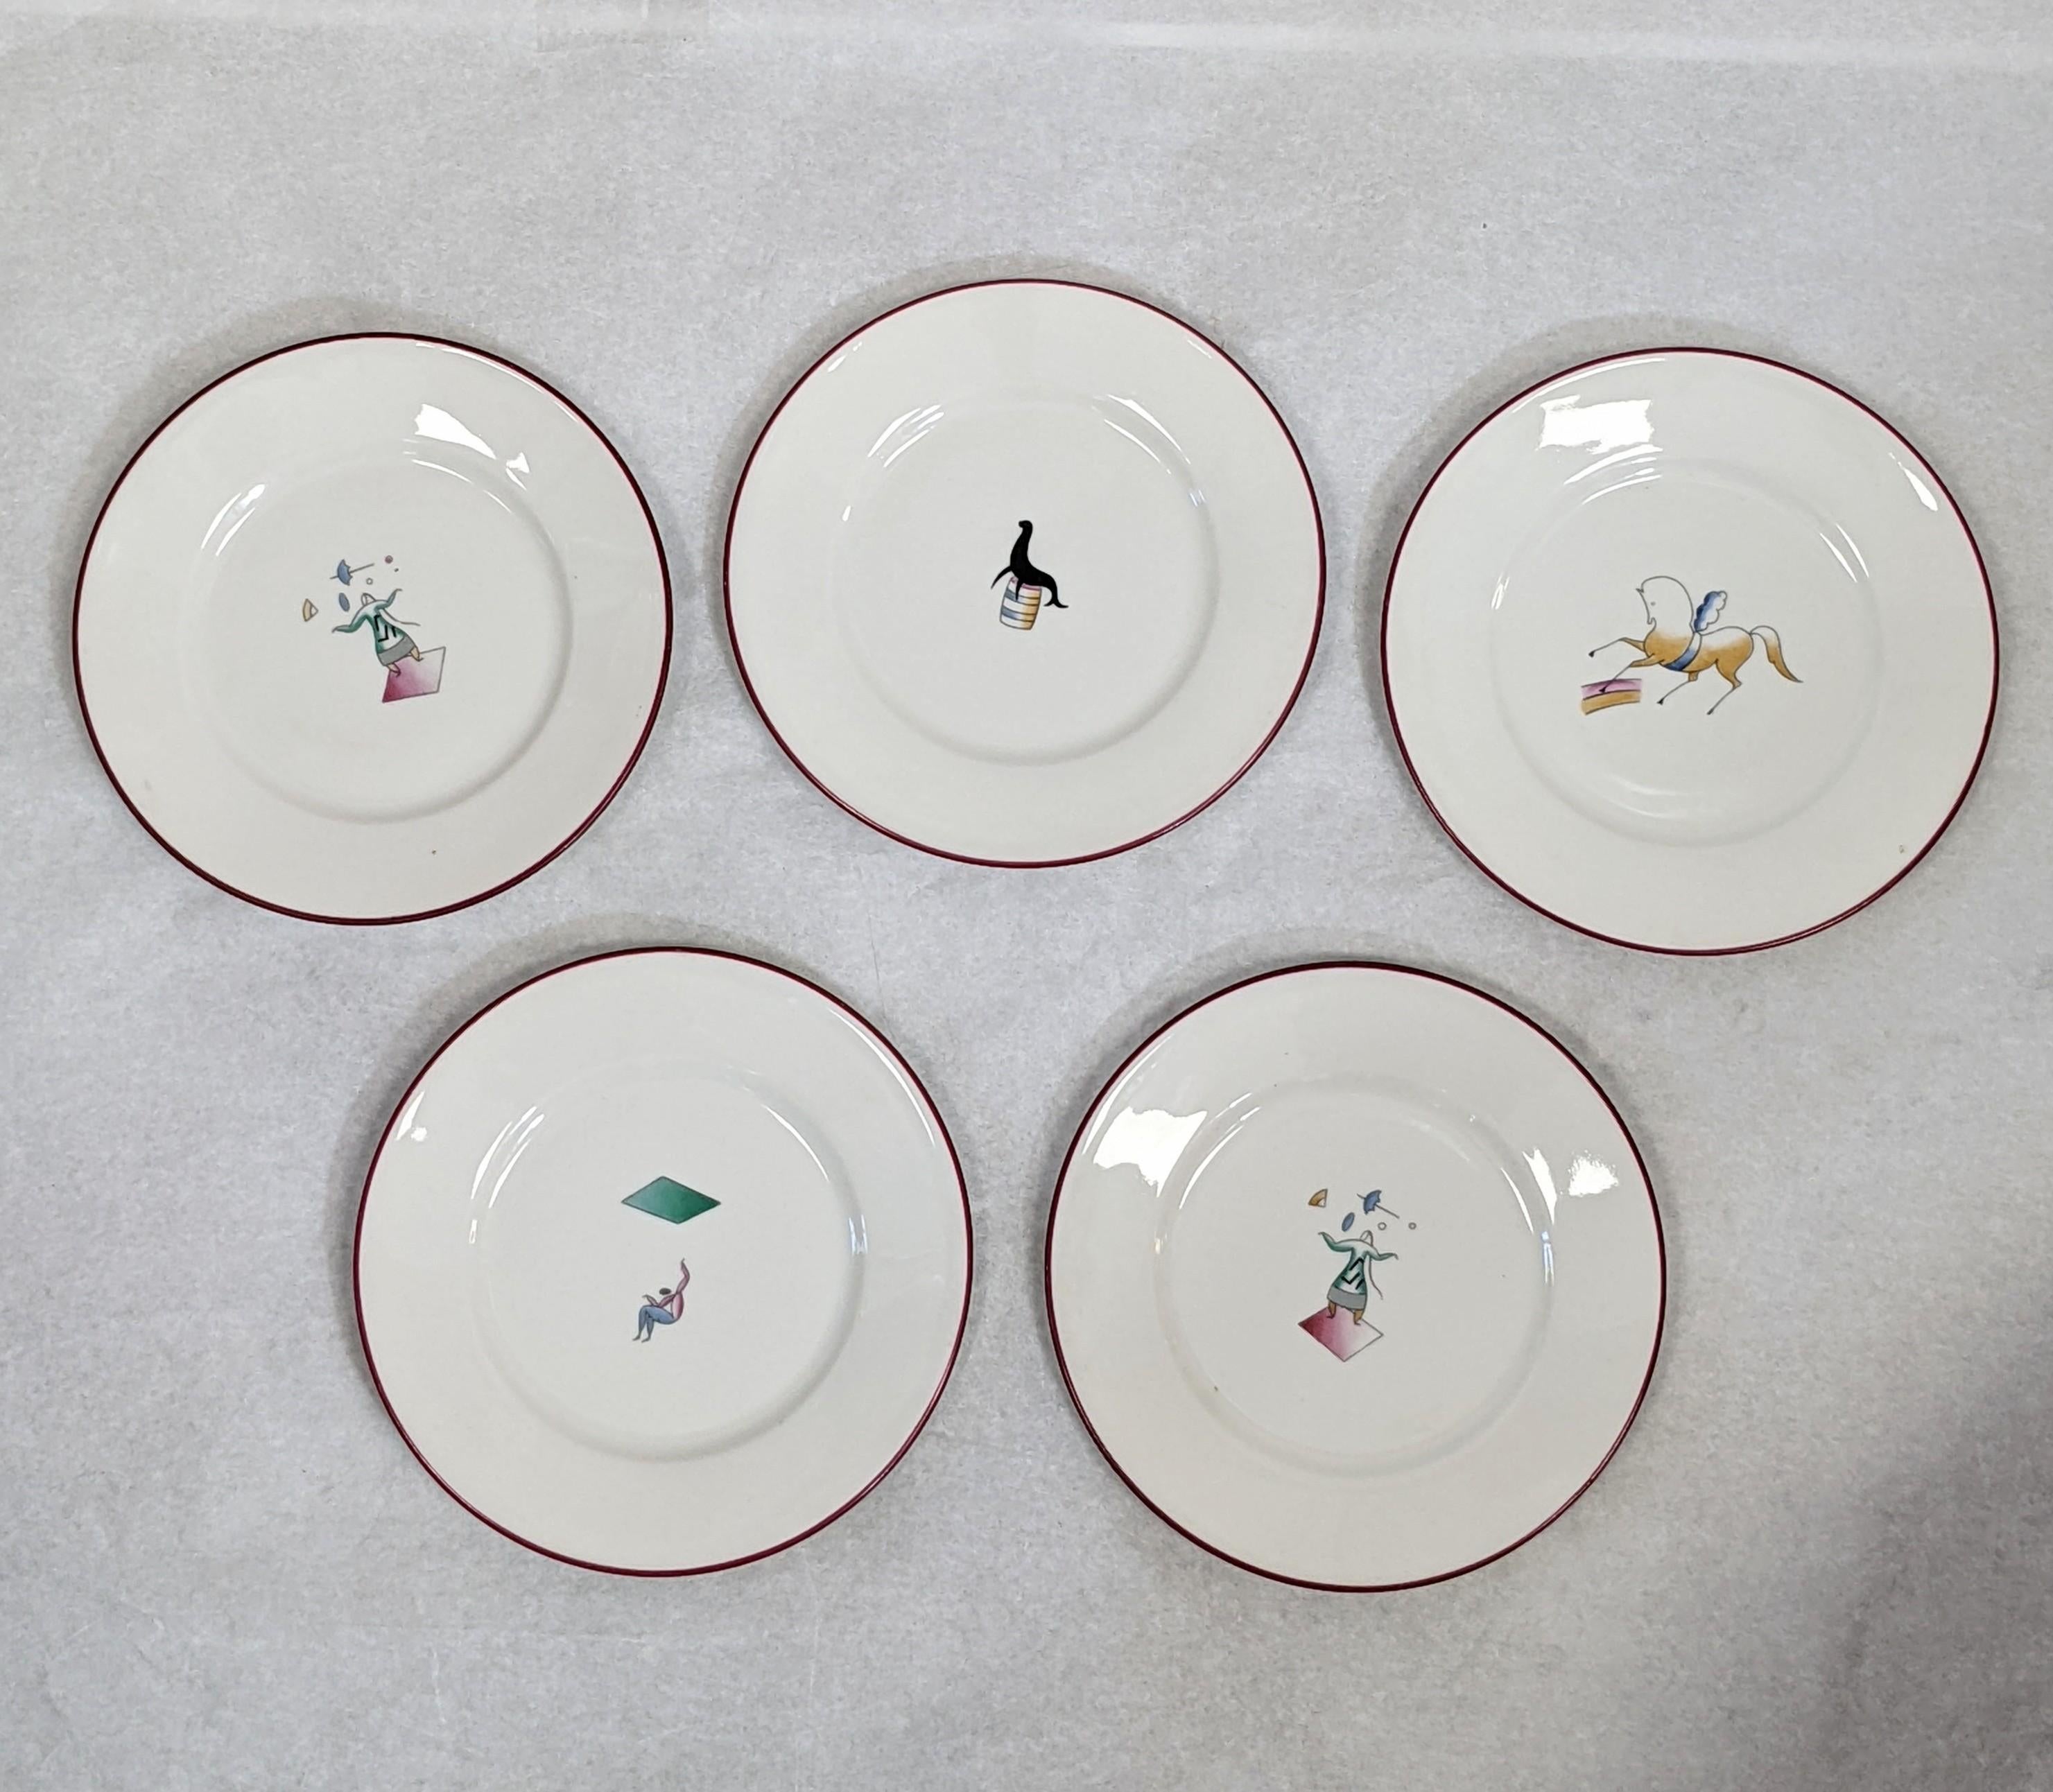 Il Circo (circus) small plates from the mid 1930's Italy designed by Gio Ponti for Ginori. Each decorated with a charming Modernist figure of a circus performer or animal. Priced per piece. 6.5